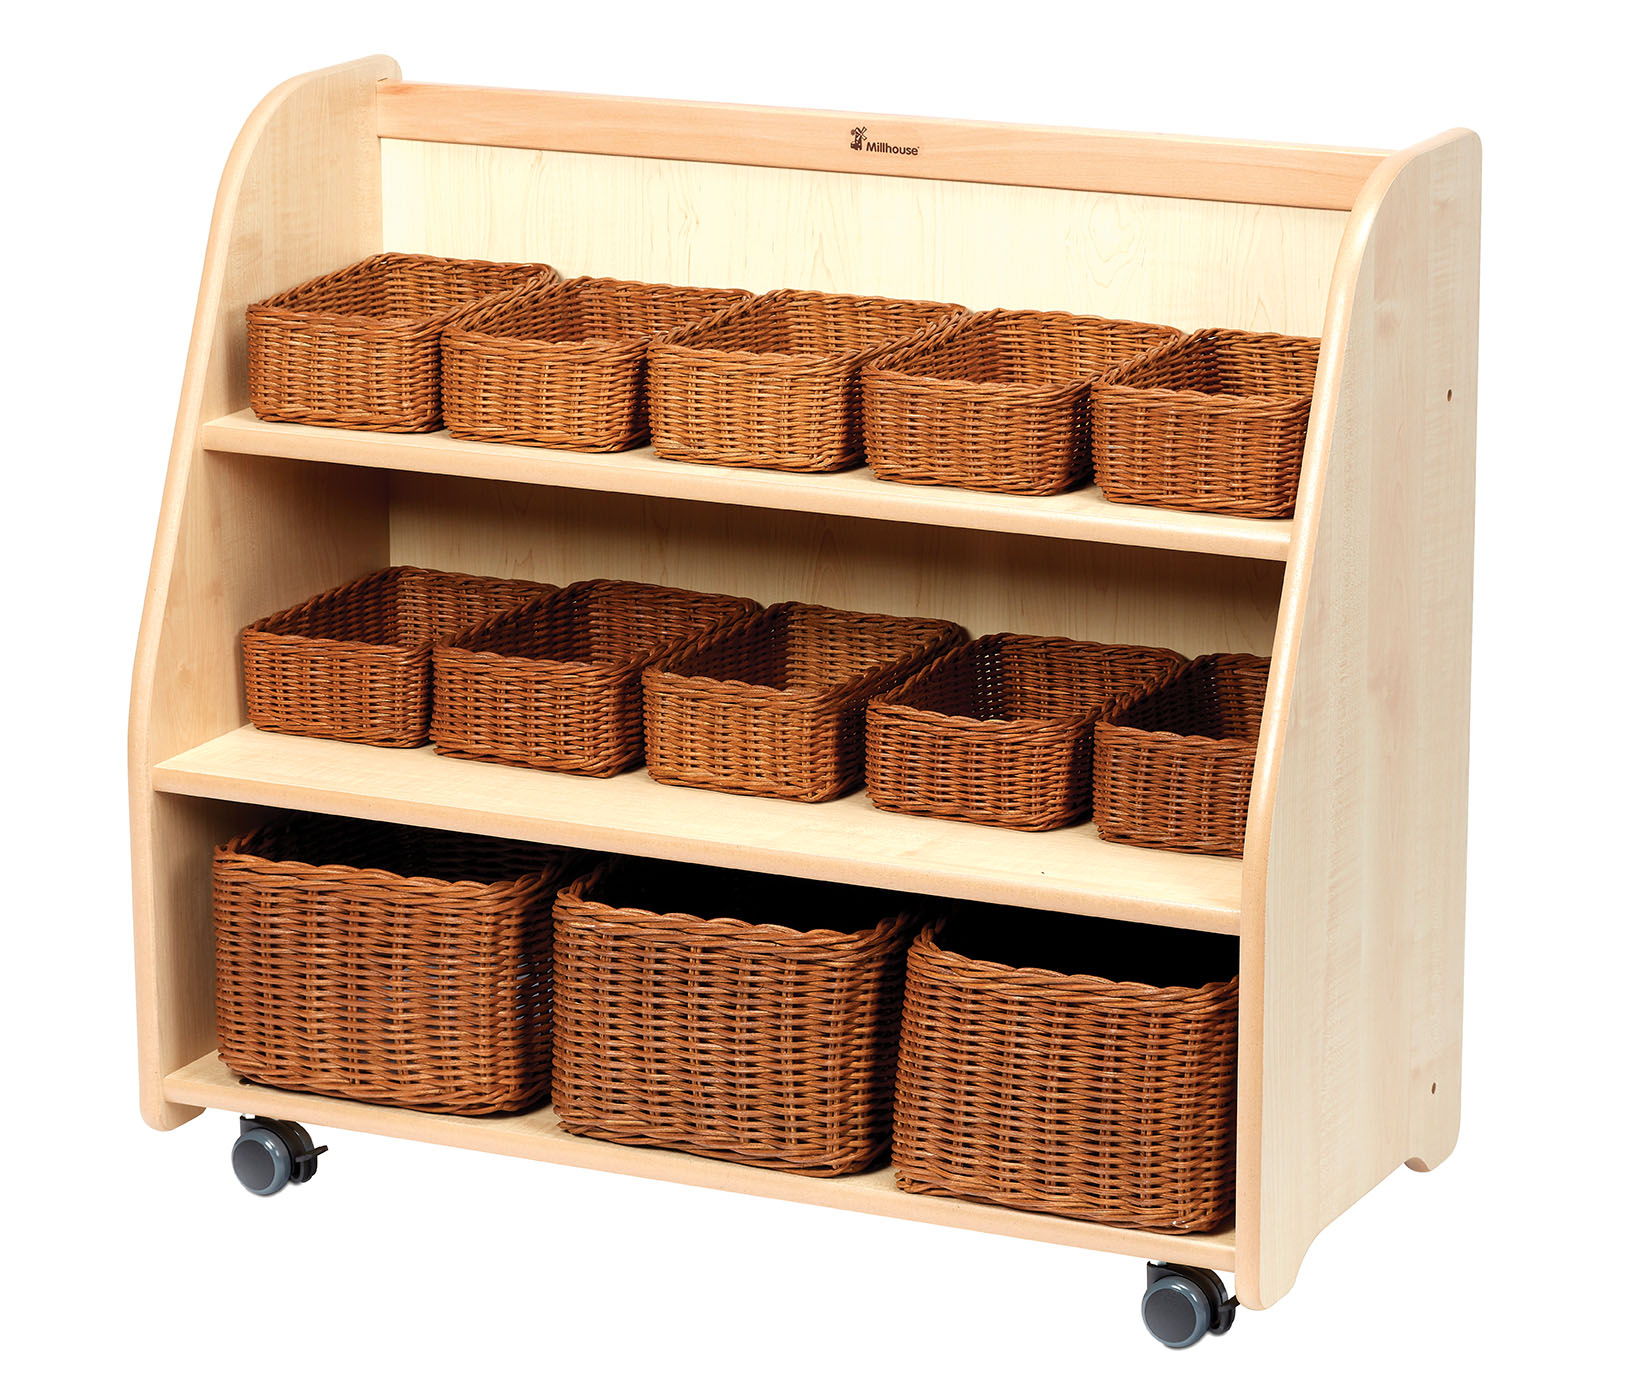 PT849-Millhouse-Early-Years-Furniture-Mobile-Trolley-With-Small-And-Large-Baskets_Main_RGB.jpg